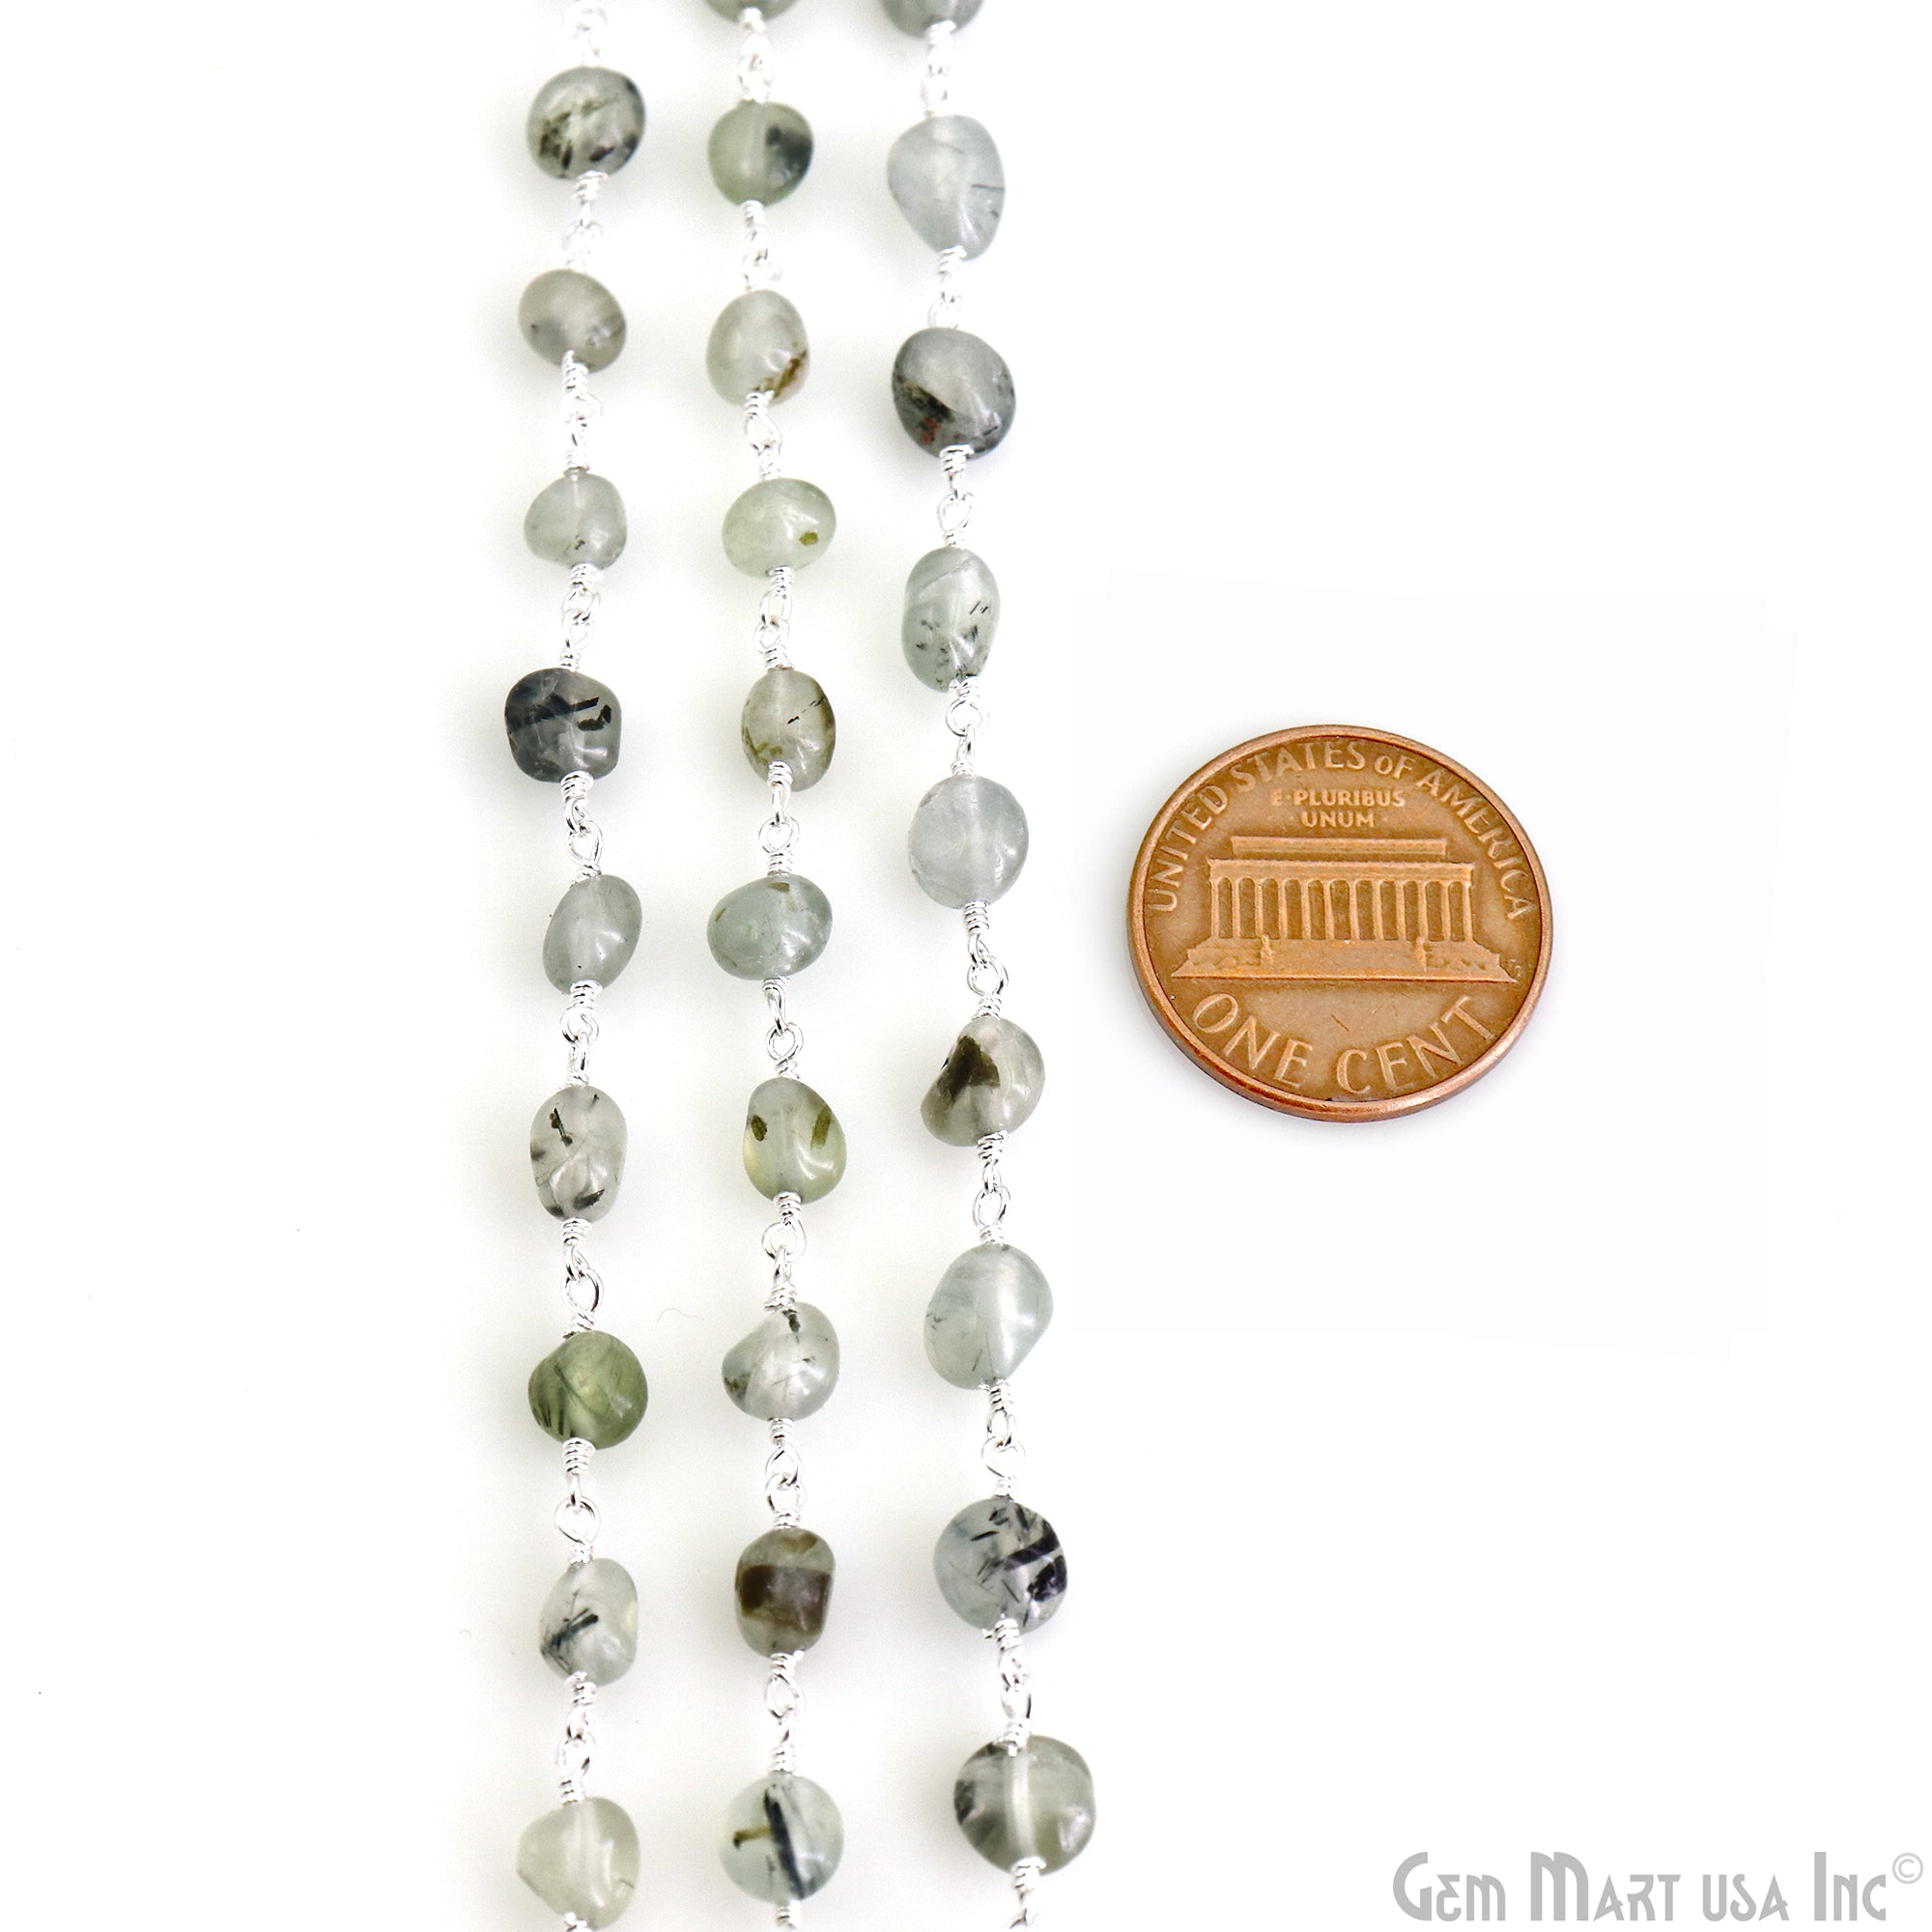 Green Rutile Tumble Beads 8x5mm Silver Wire Wrapped Rosary Chain